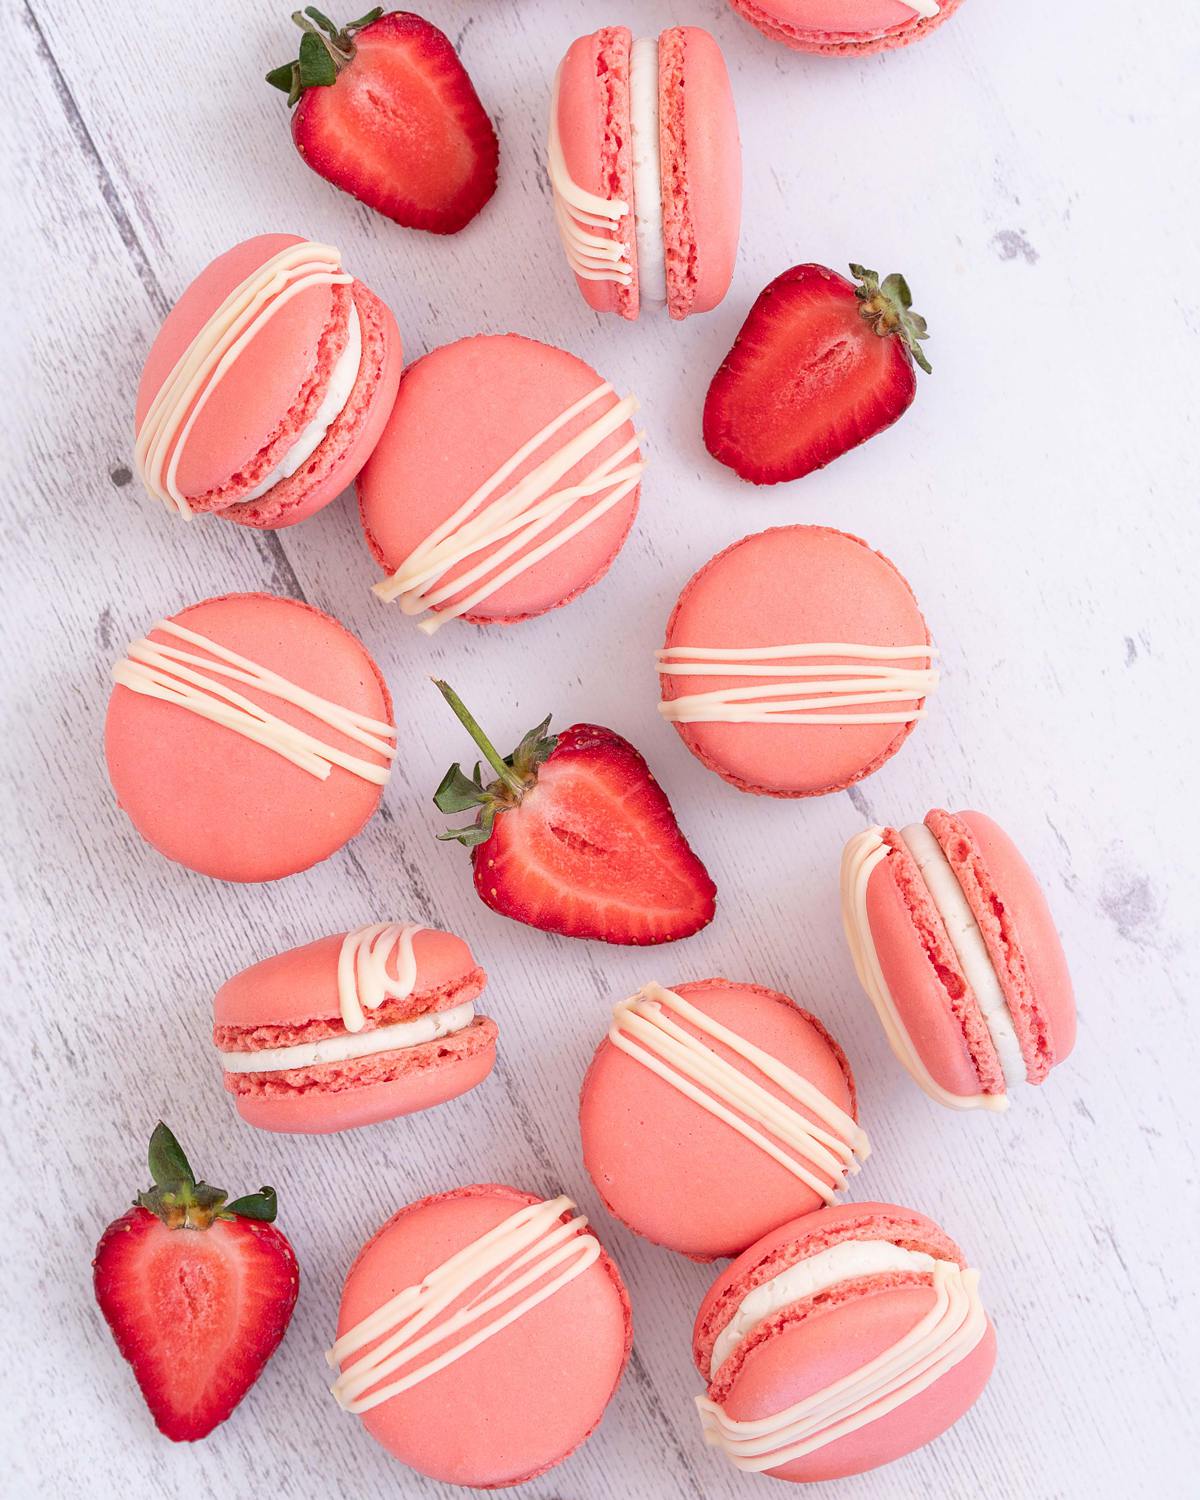 MACARON QUESTION. Please help. I recently bought a silicon macaron mat to  make perfectly shaped macarons, and every time I use it, 75% of the macarons  stick to the mat. (This picture